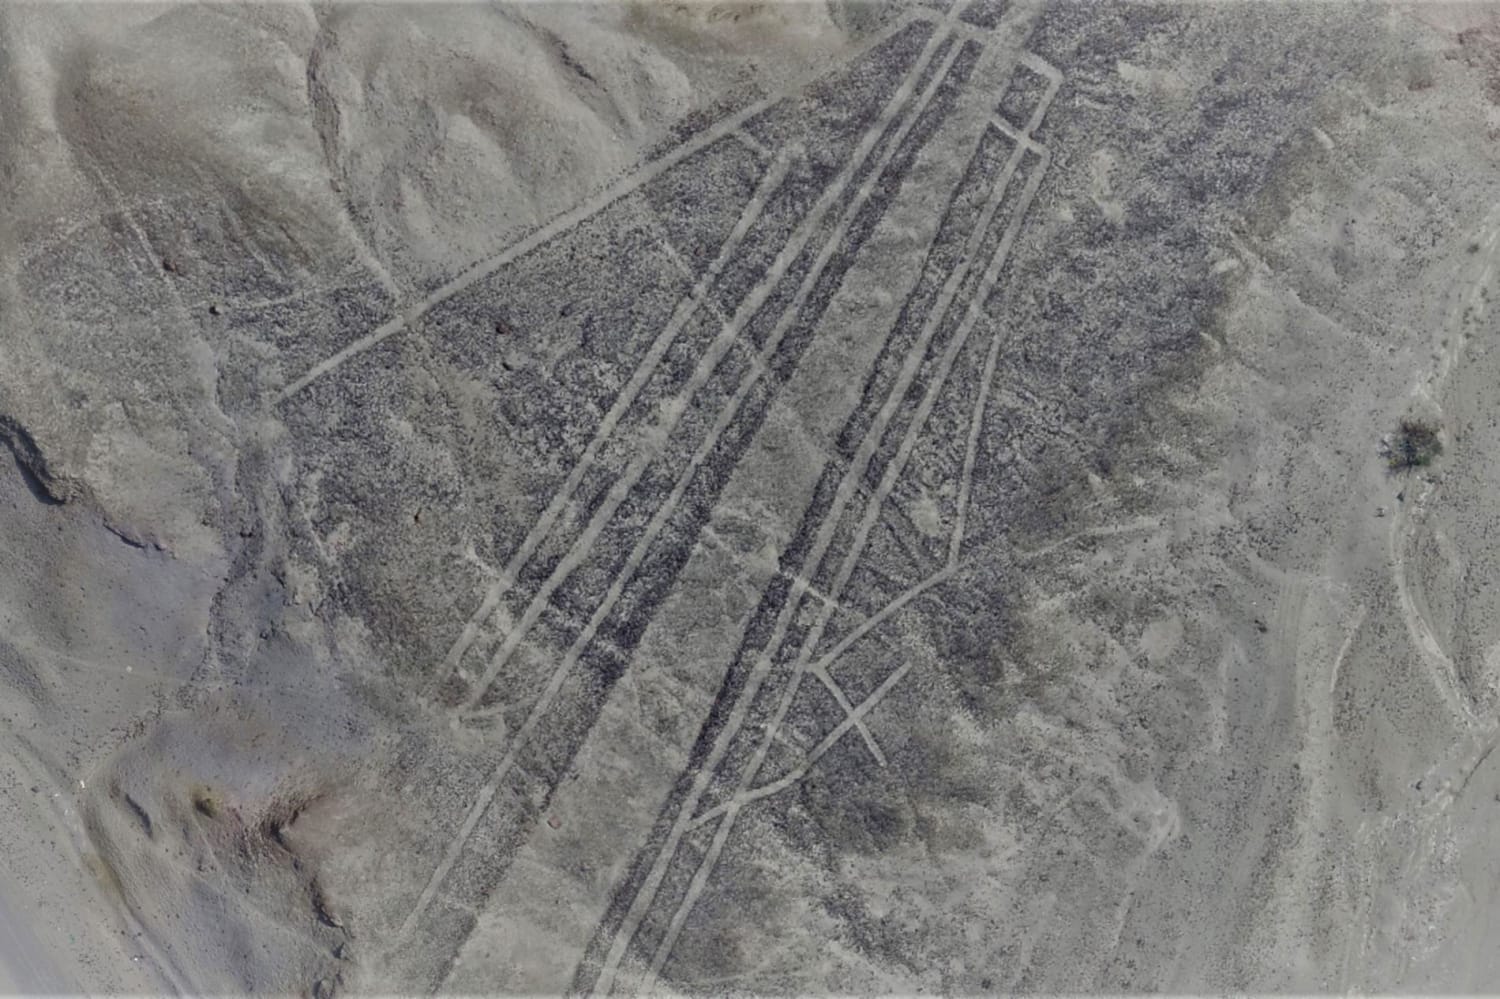 Exclusive: Massive Ancient Drawings Found in Peruvian Desert